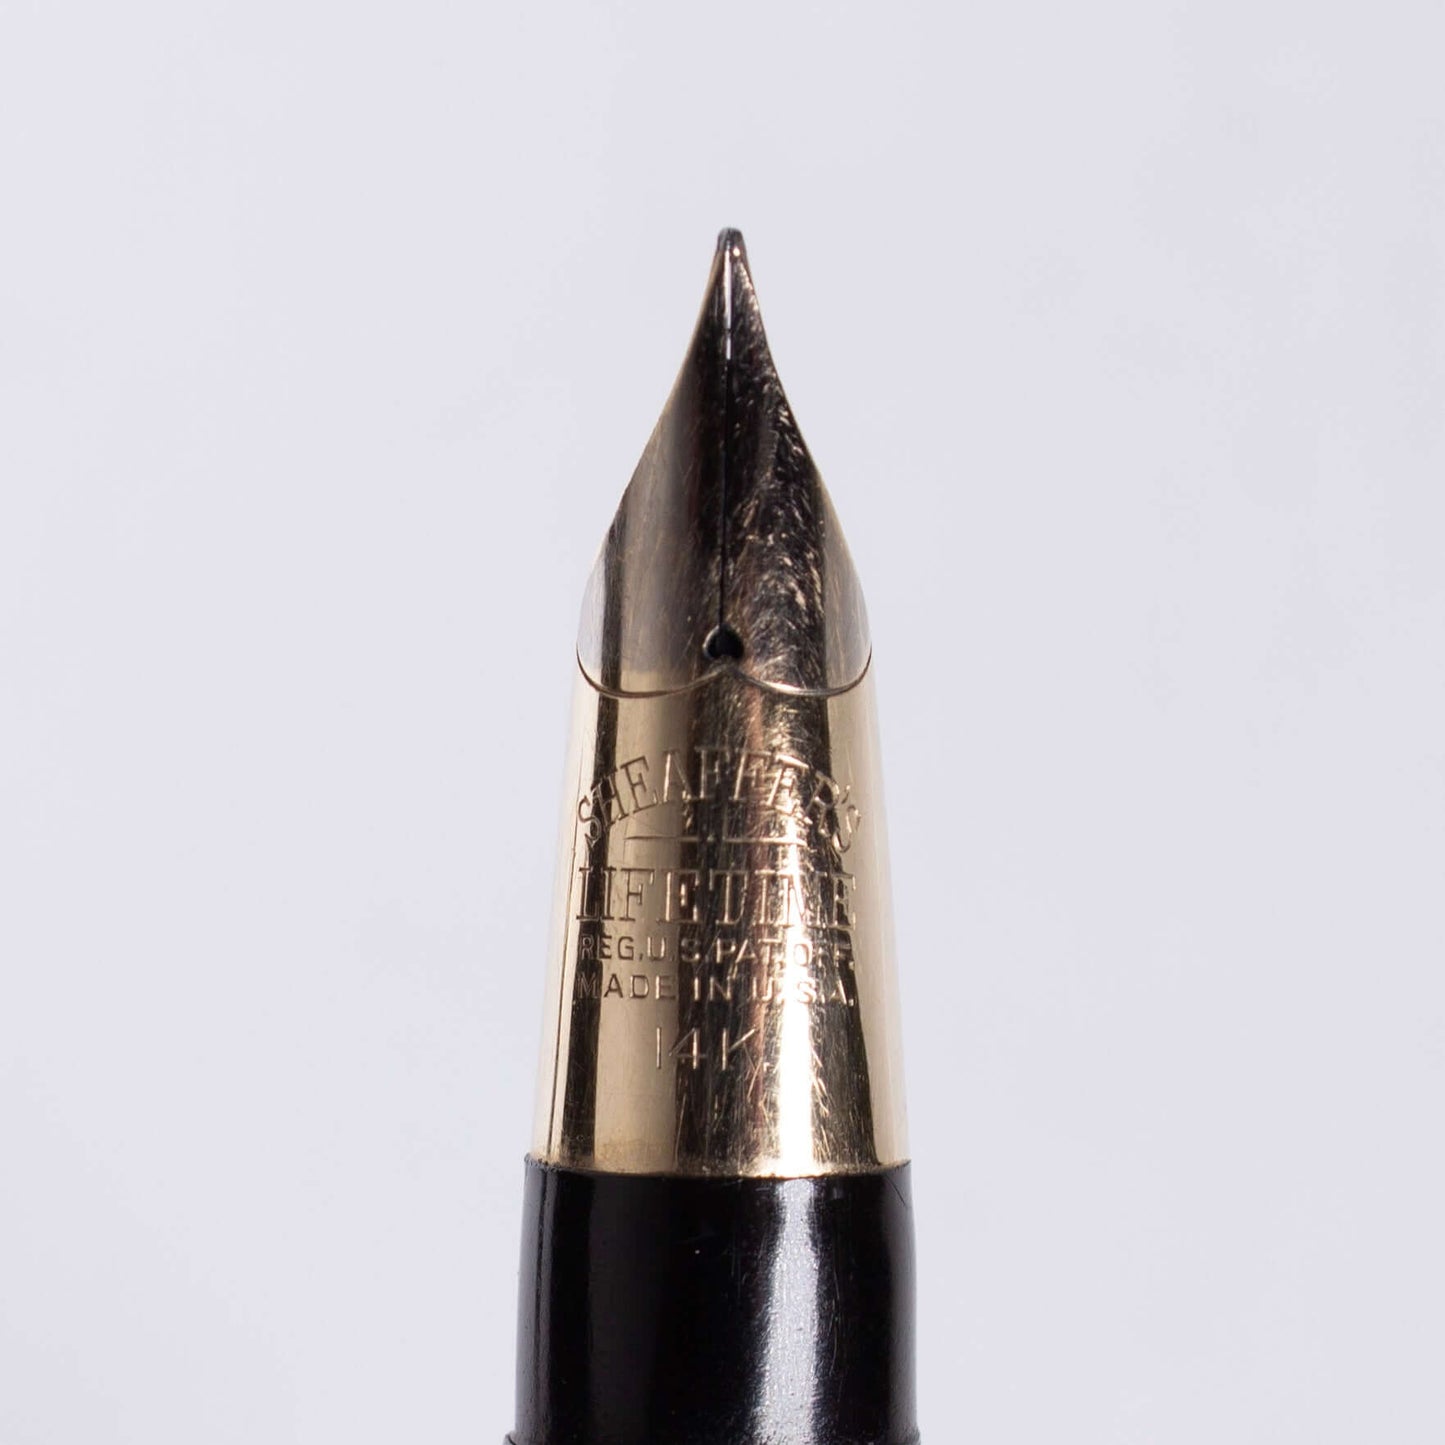 ${titleType: Vintage Vac-Fil Fountain Pen Product name: Sheaffer Vacuum-Fil Manufacturer and Year: 1940's Length: 5 inch Filling System: Vacuum-Fil, Plunger Filler Color/Pattern: Black Nib Type/Condition and remarks: Medium 14K two-tone Triumph Nib Condit